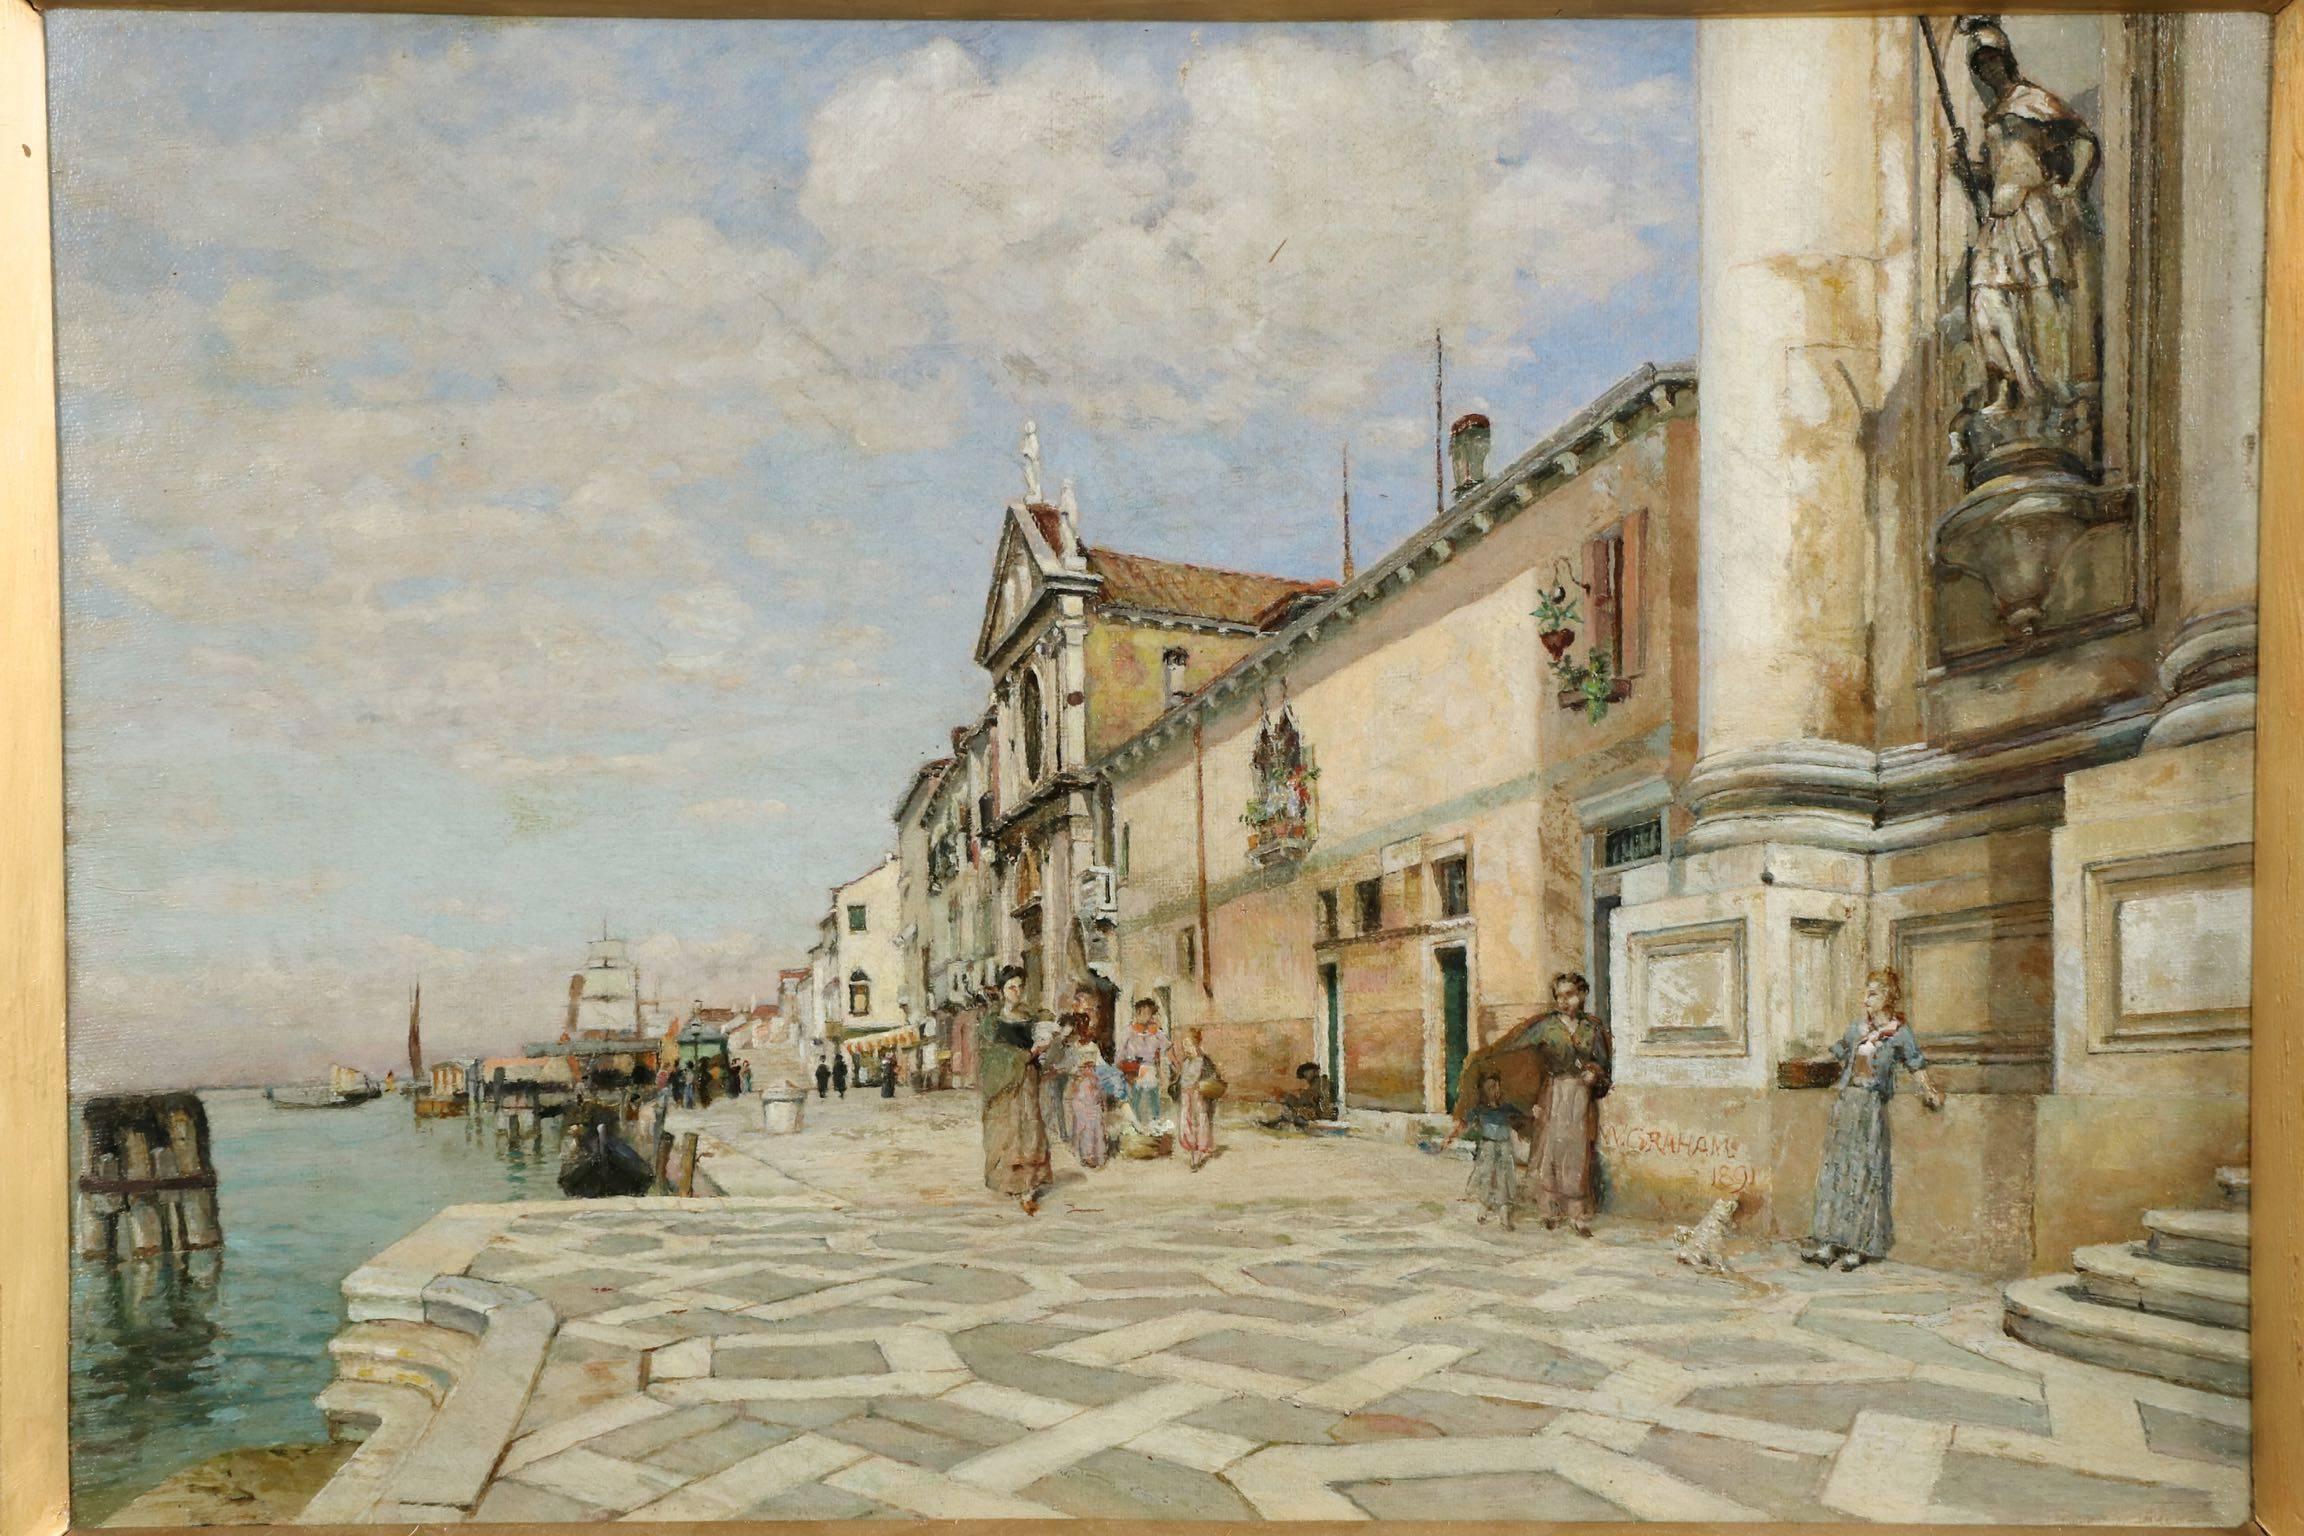 A work that is executed with subtlety and an interesting brush touch, the painting captures a view along the water’s edge in Venice, a look at daily life during the era. There is a certain translucence to the handling of the surface that is almost